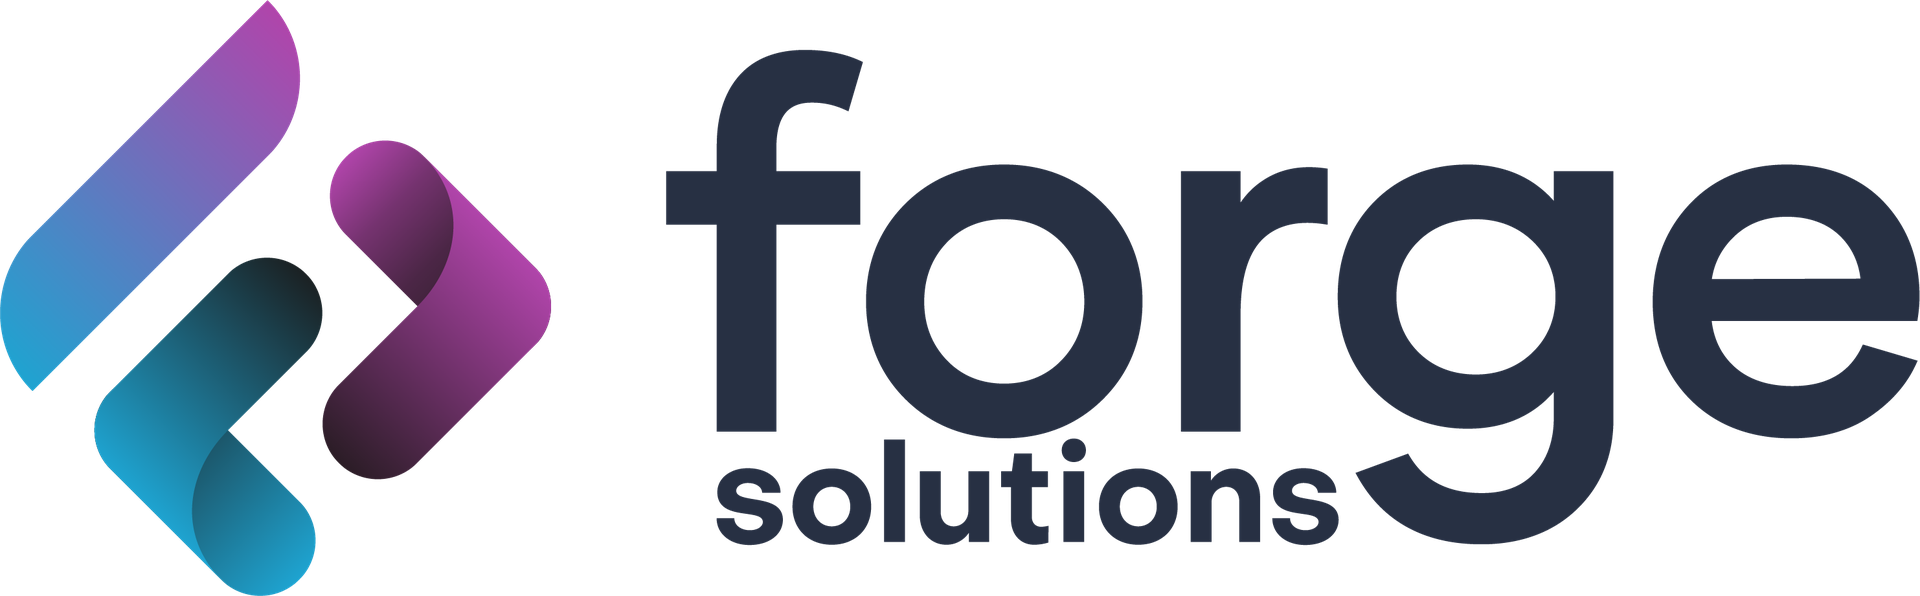 Forge Solutions